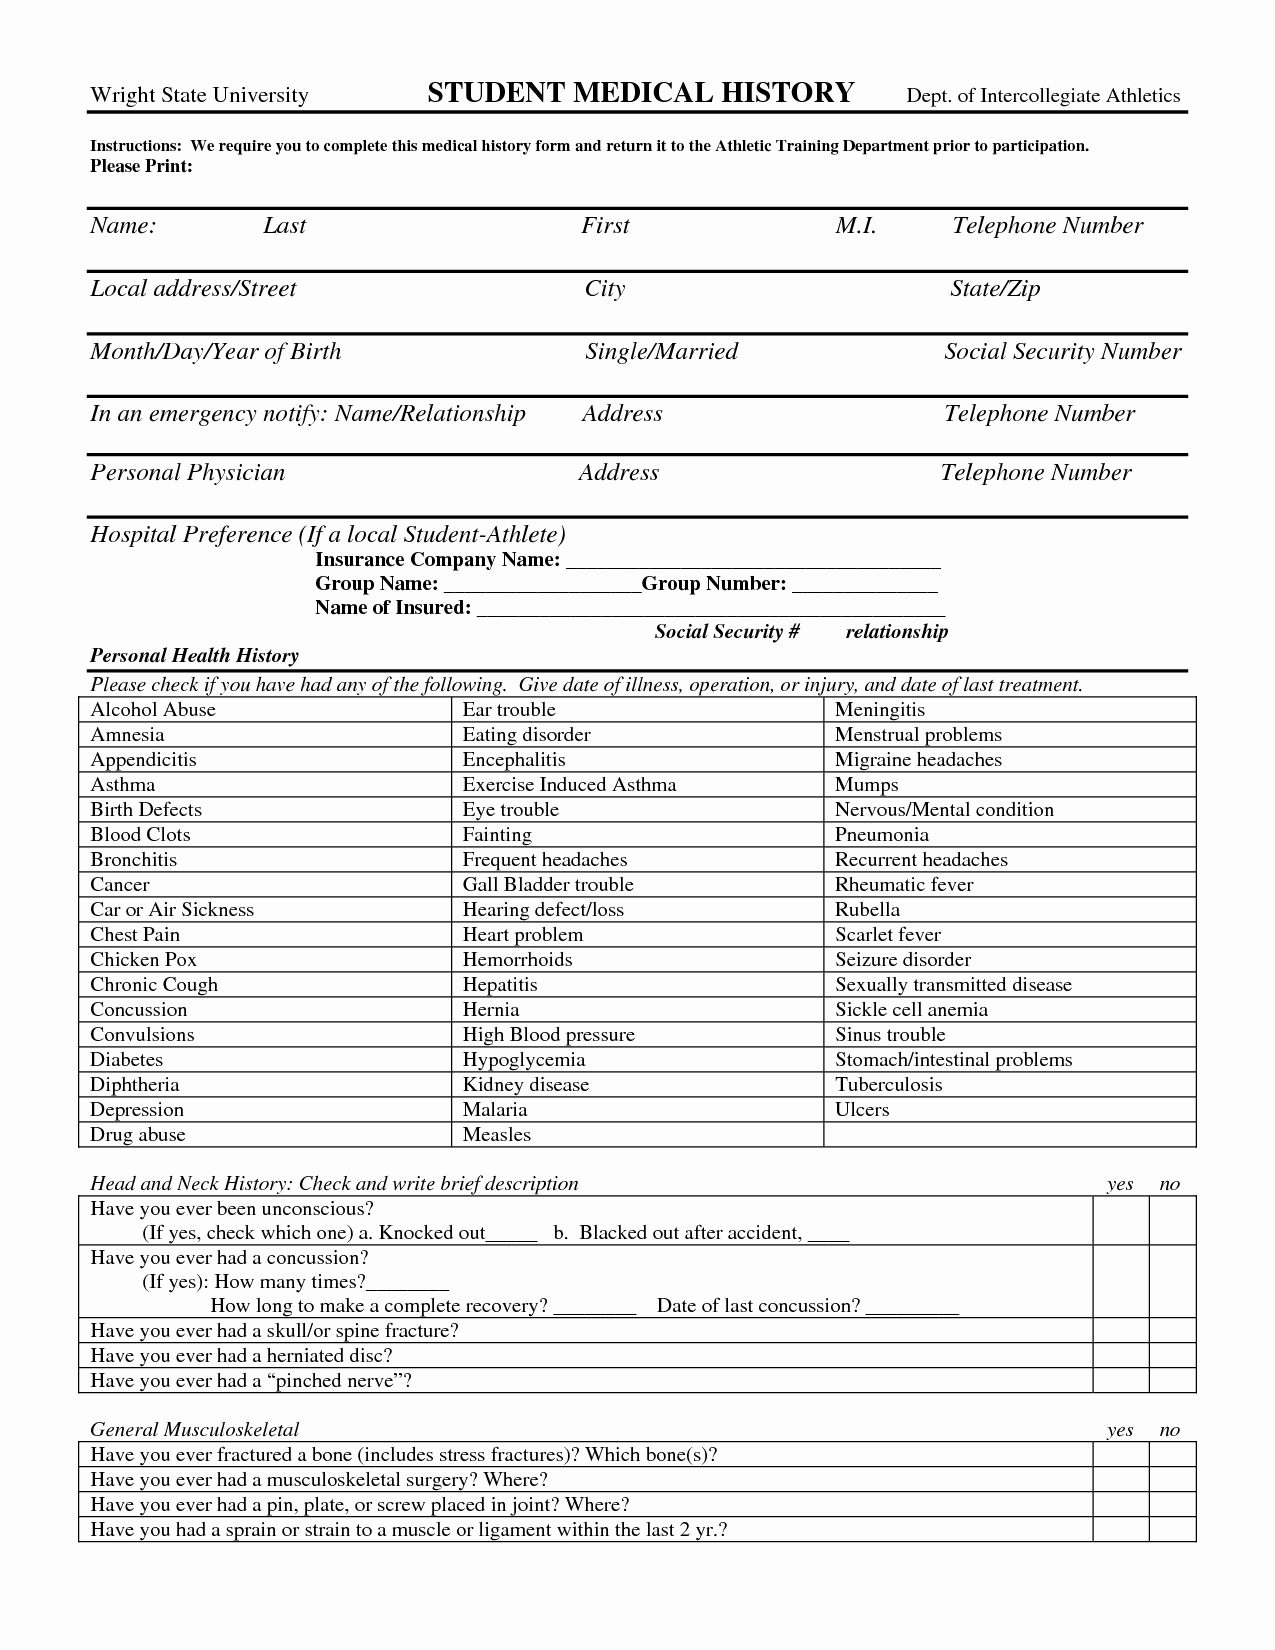 Personal Medical History form Template New 7 Best Of Plete Medical History form Printable